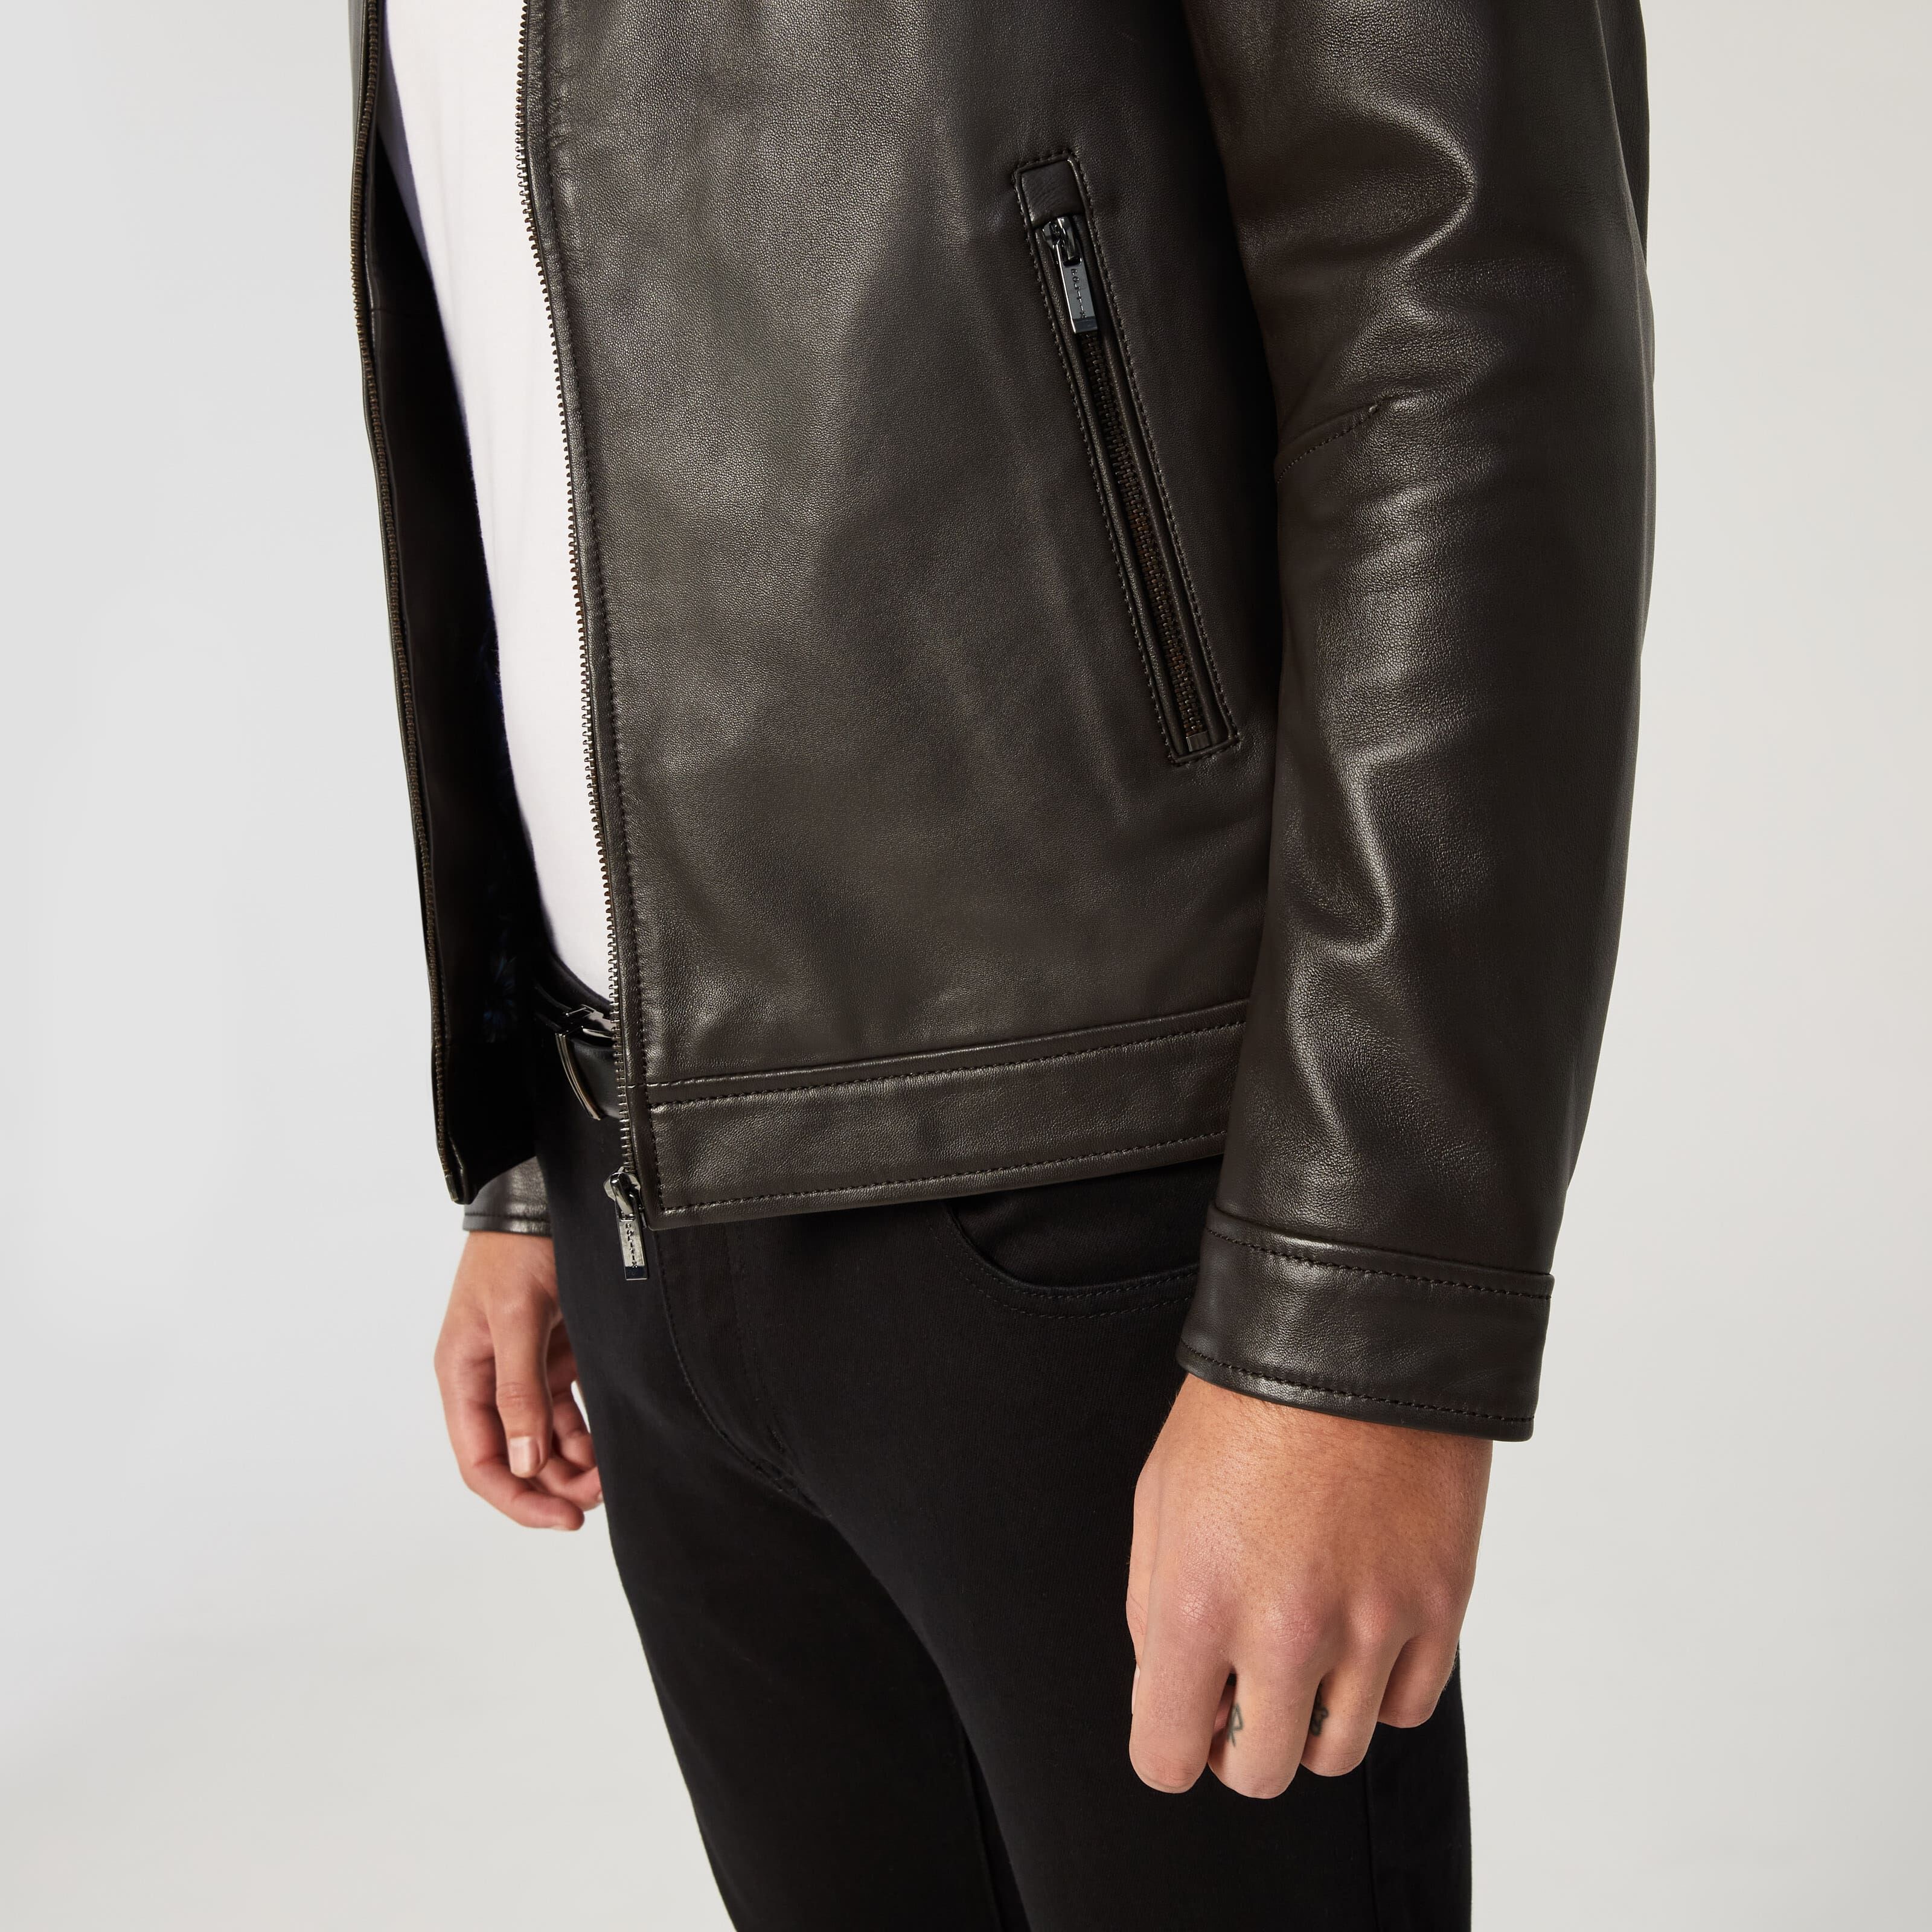 fjackets Leather Blazer For Men - Black & Brown Real Lambskin Casual Men's  Leather Jacket Coats - Black Leather Blazer | [1500561], XS at Amazon Men's  Clothing store